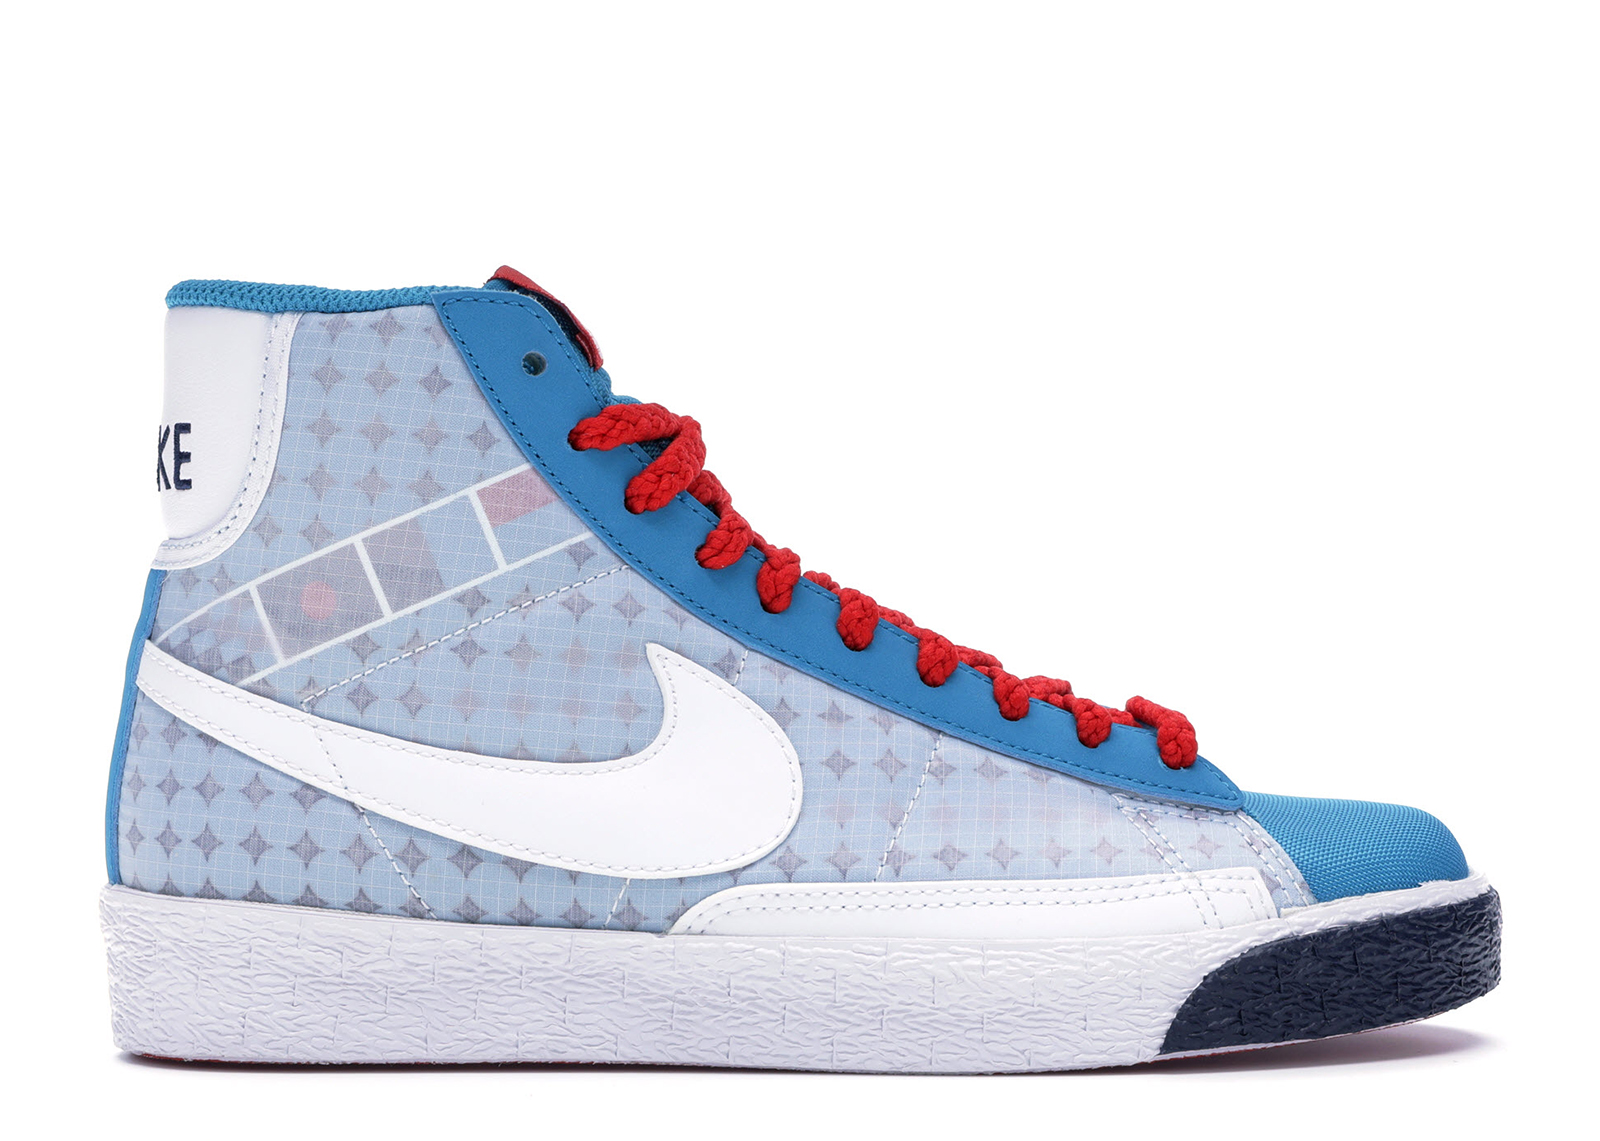 Nike Blazer High Neo Turquoise/Midnight Navy-Cement Red